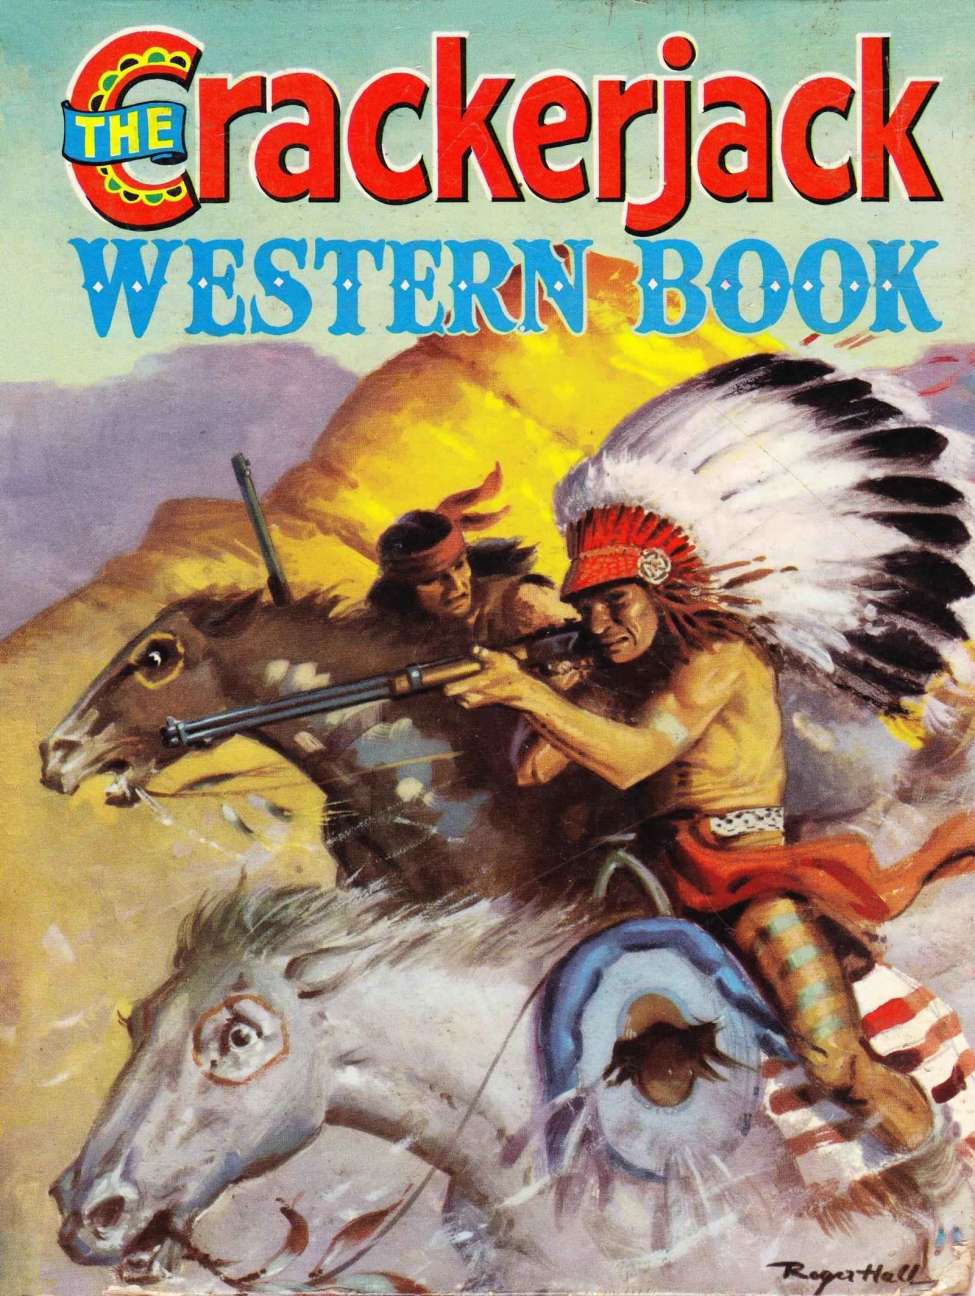 Book Cover For Crackerjack Western Book 1959